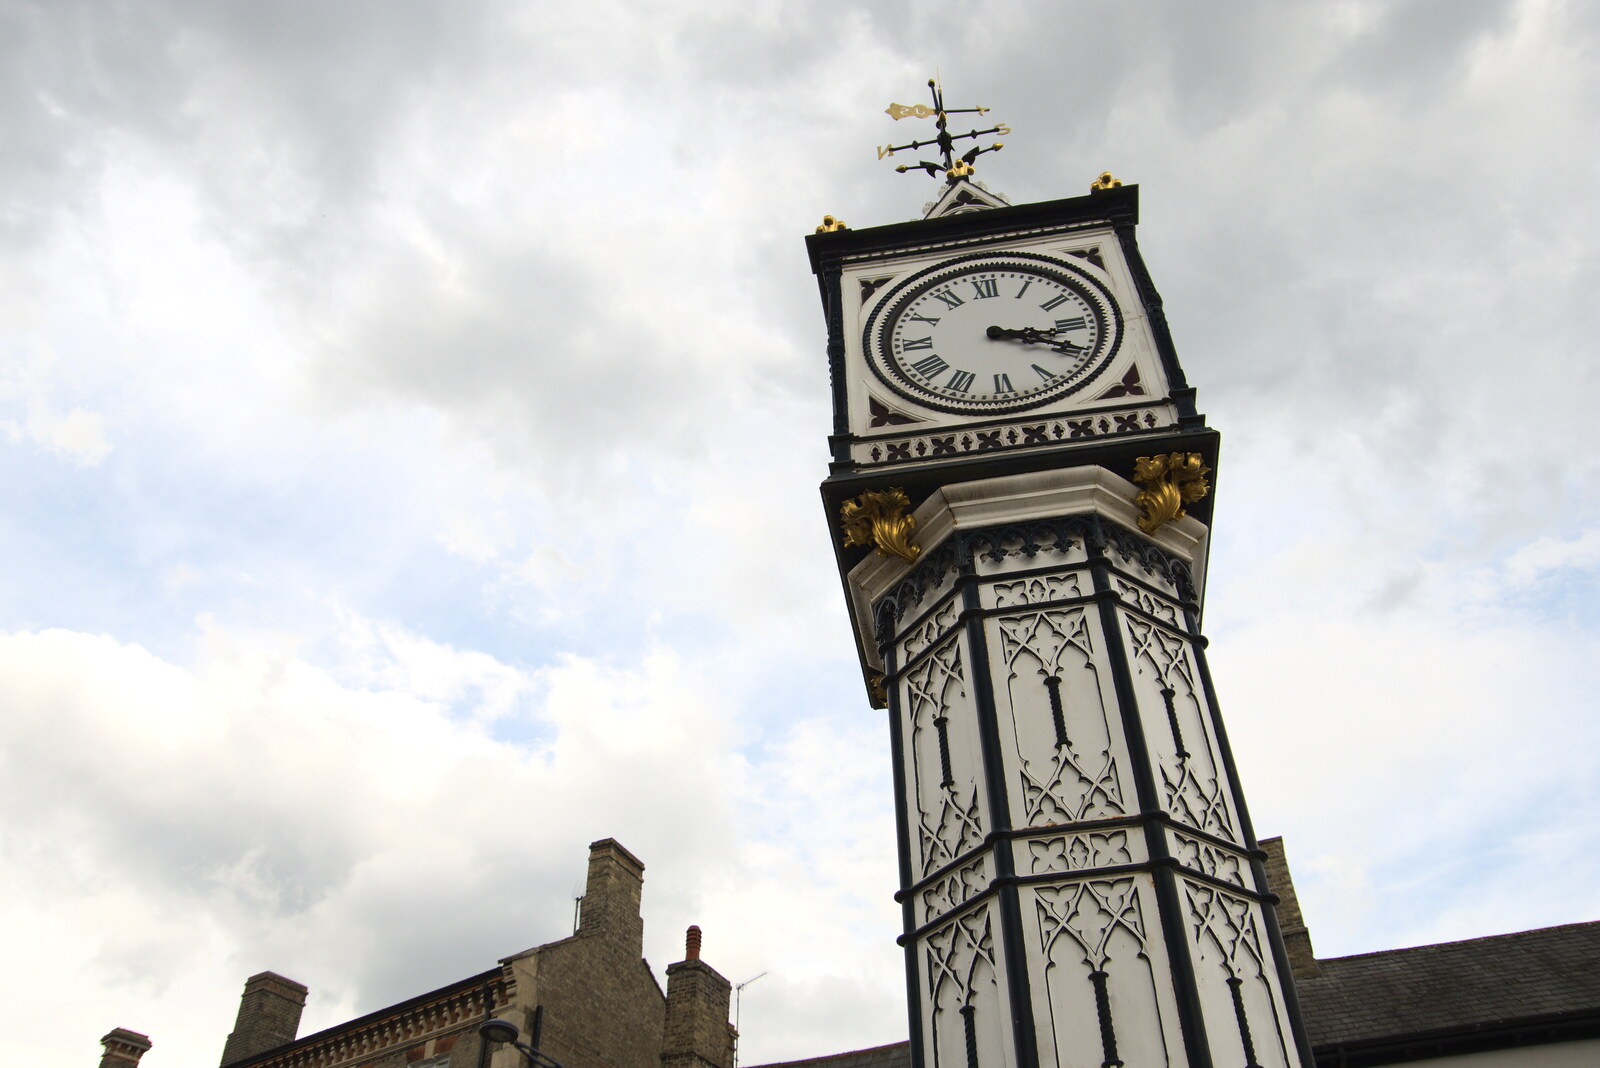 The James Scott clock again from A Vaccination Afternoon, Swaffham, Norfolk - 9th May 2021